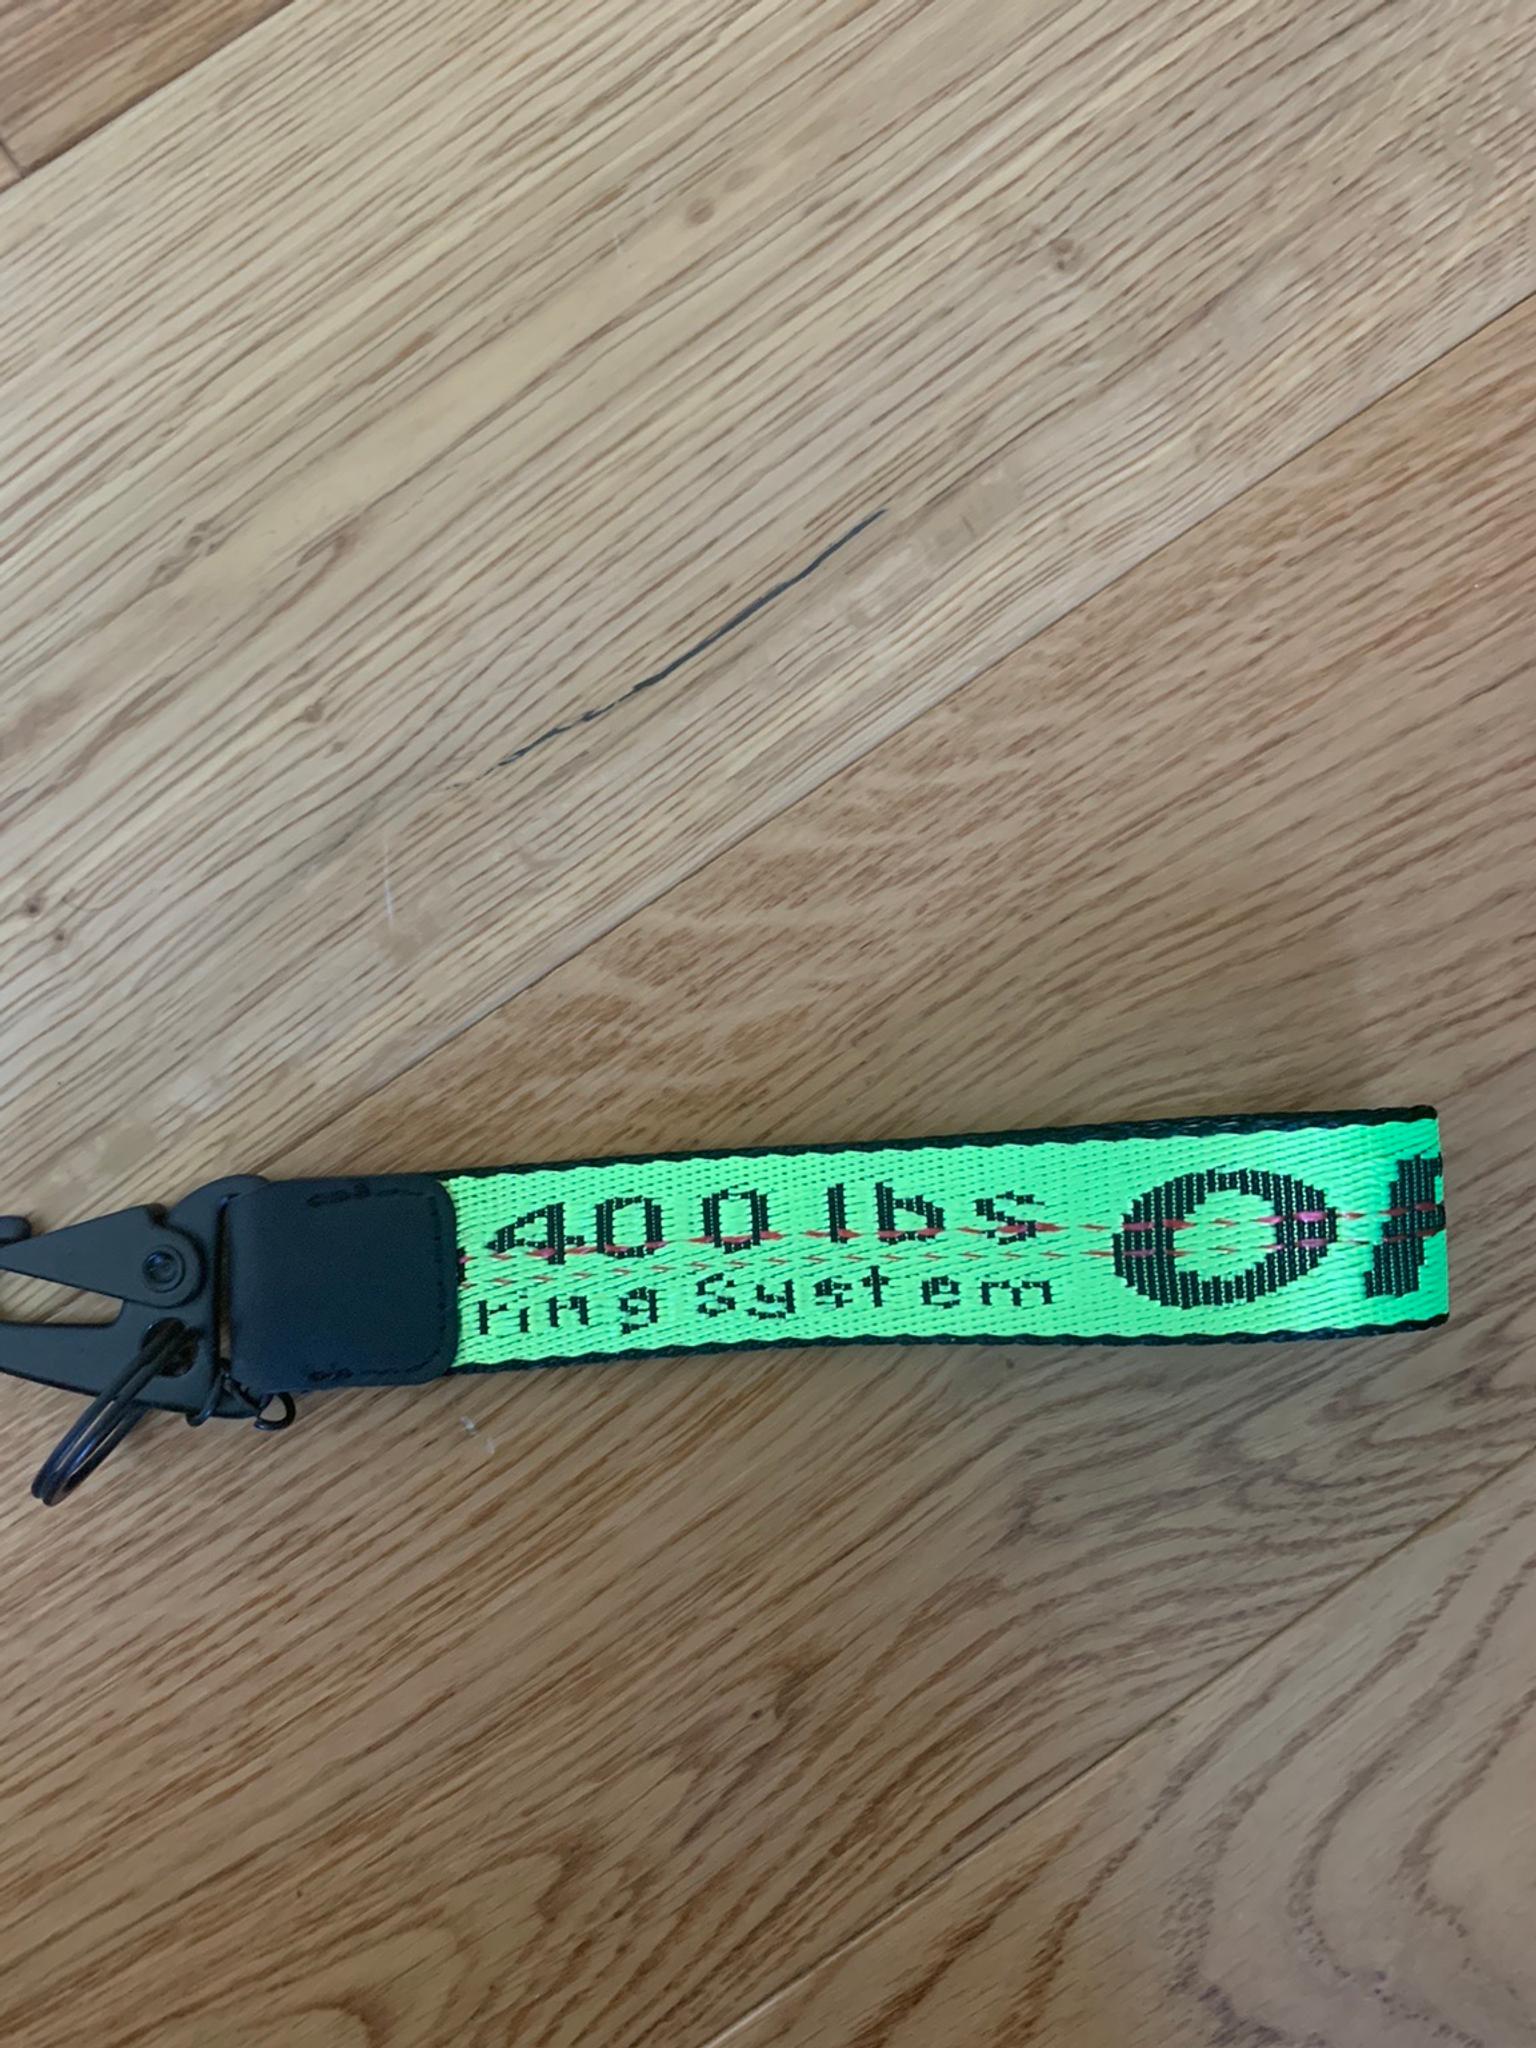 Off white keychain in GU46 Surrey Heath for £35.00 for sale | Shpock